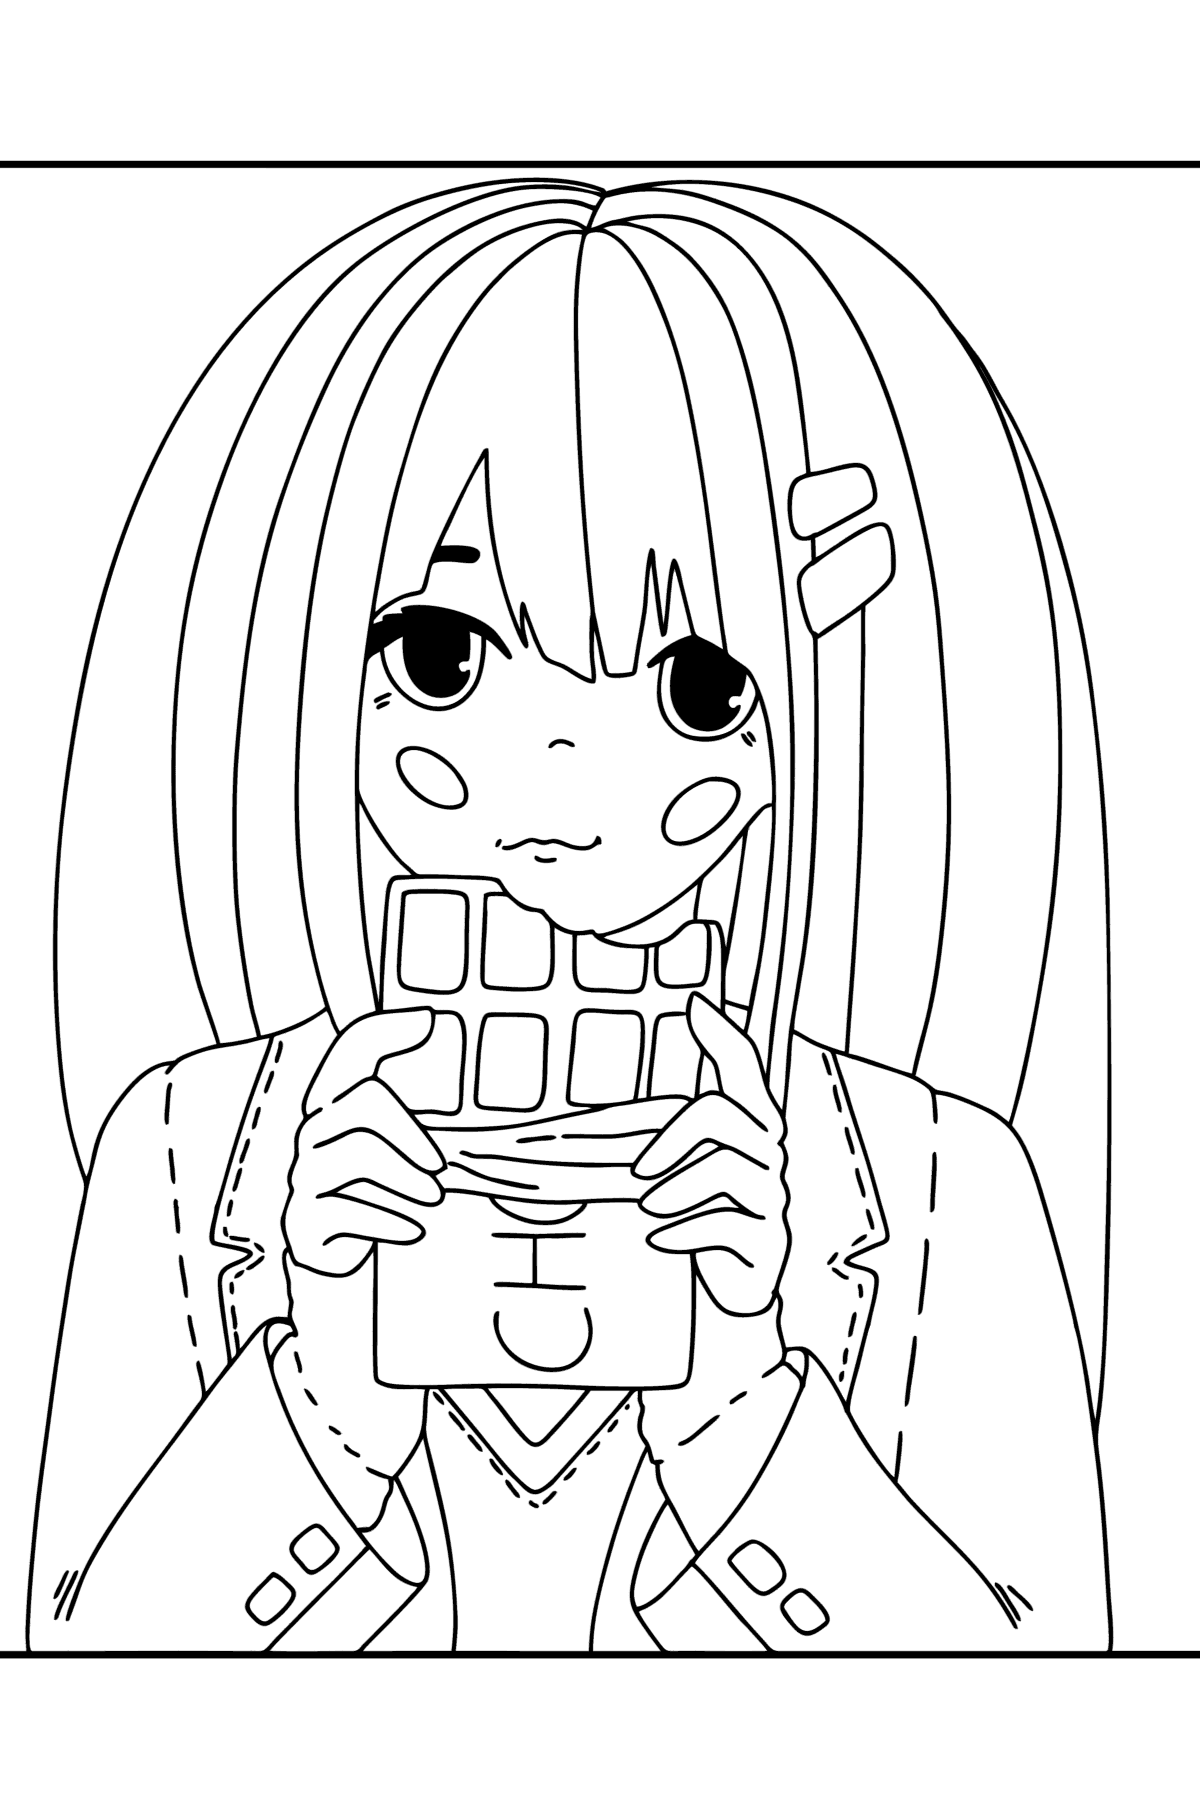 Anime coloring pages for kids â print and online free